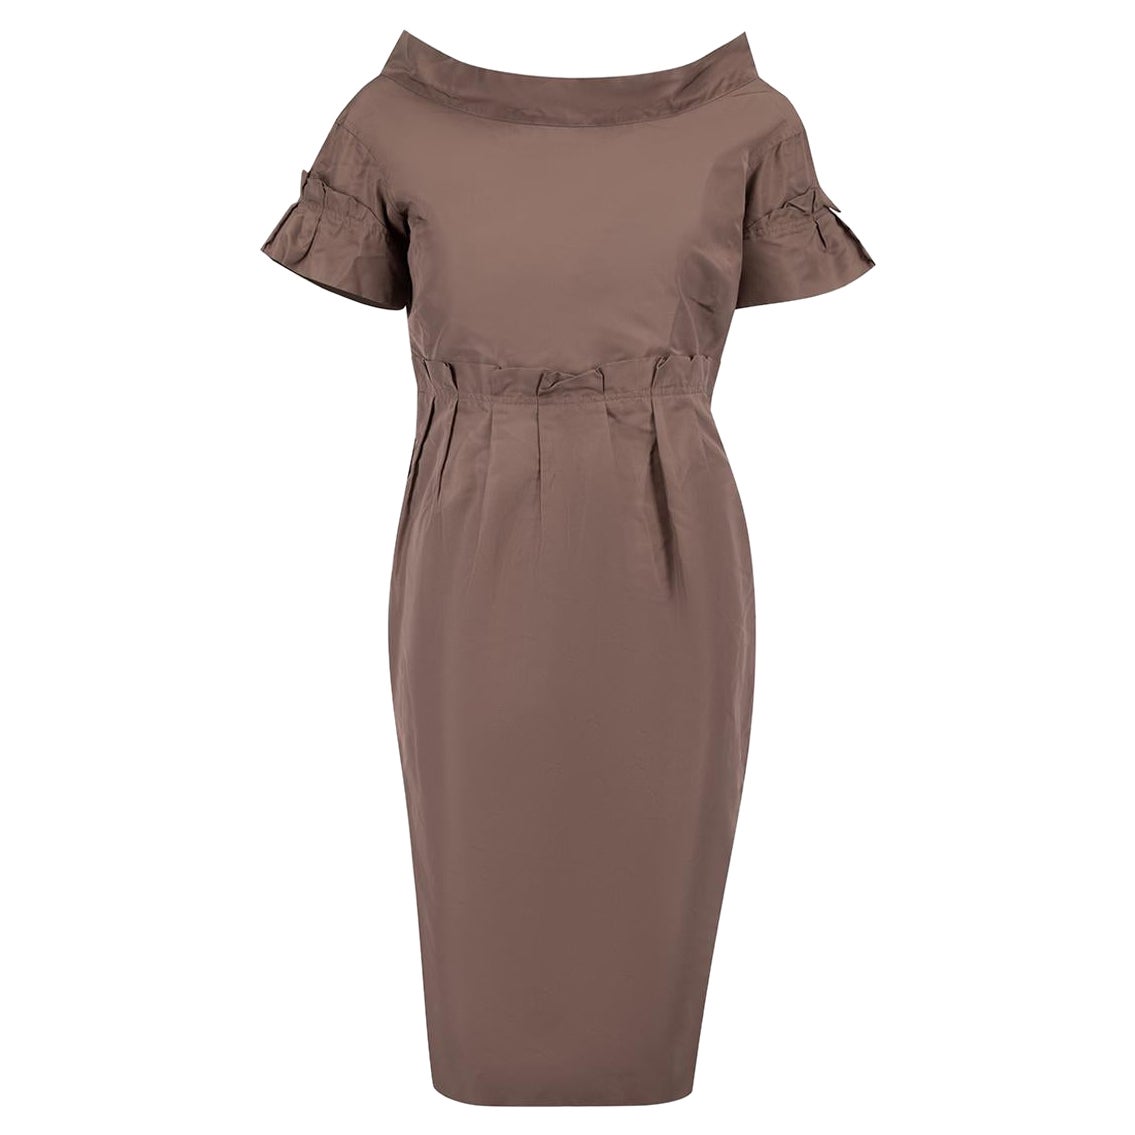 Burberry Prorsum Brown Off-The-Shoulder Dress Size M For Sale